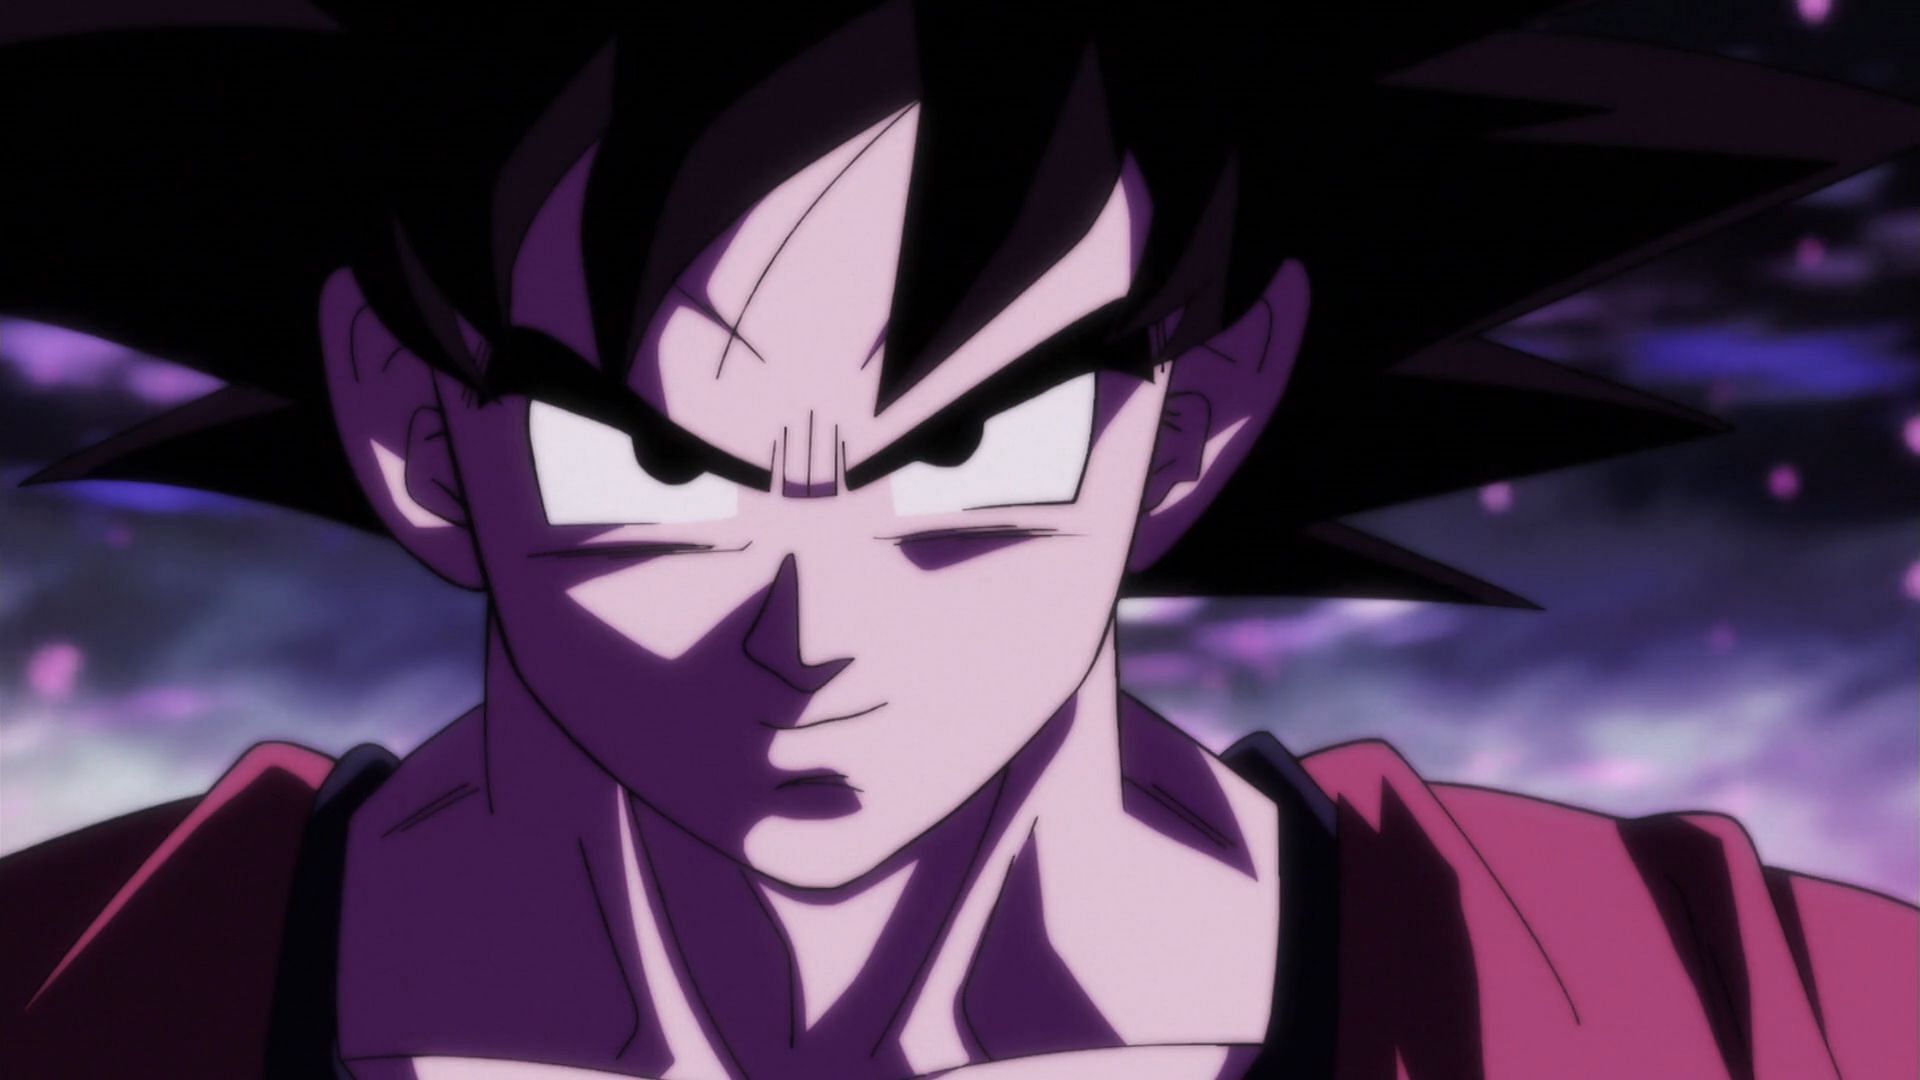 Goku blatantly lied to Frieza, and Dragon Ball Super confirms it